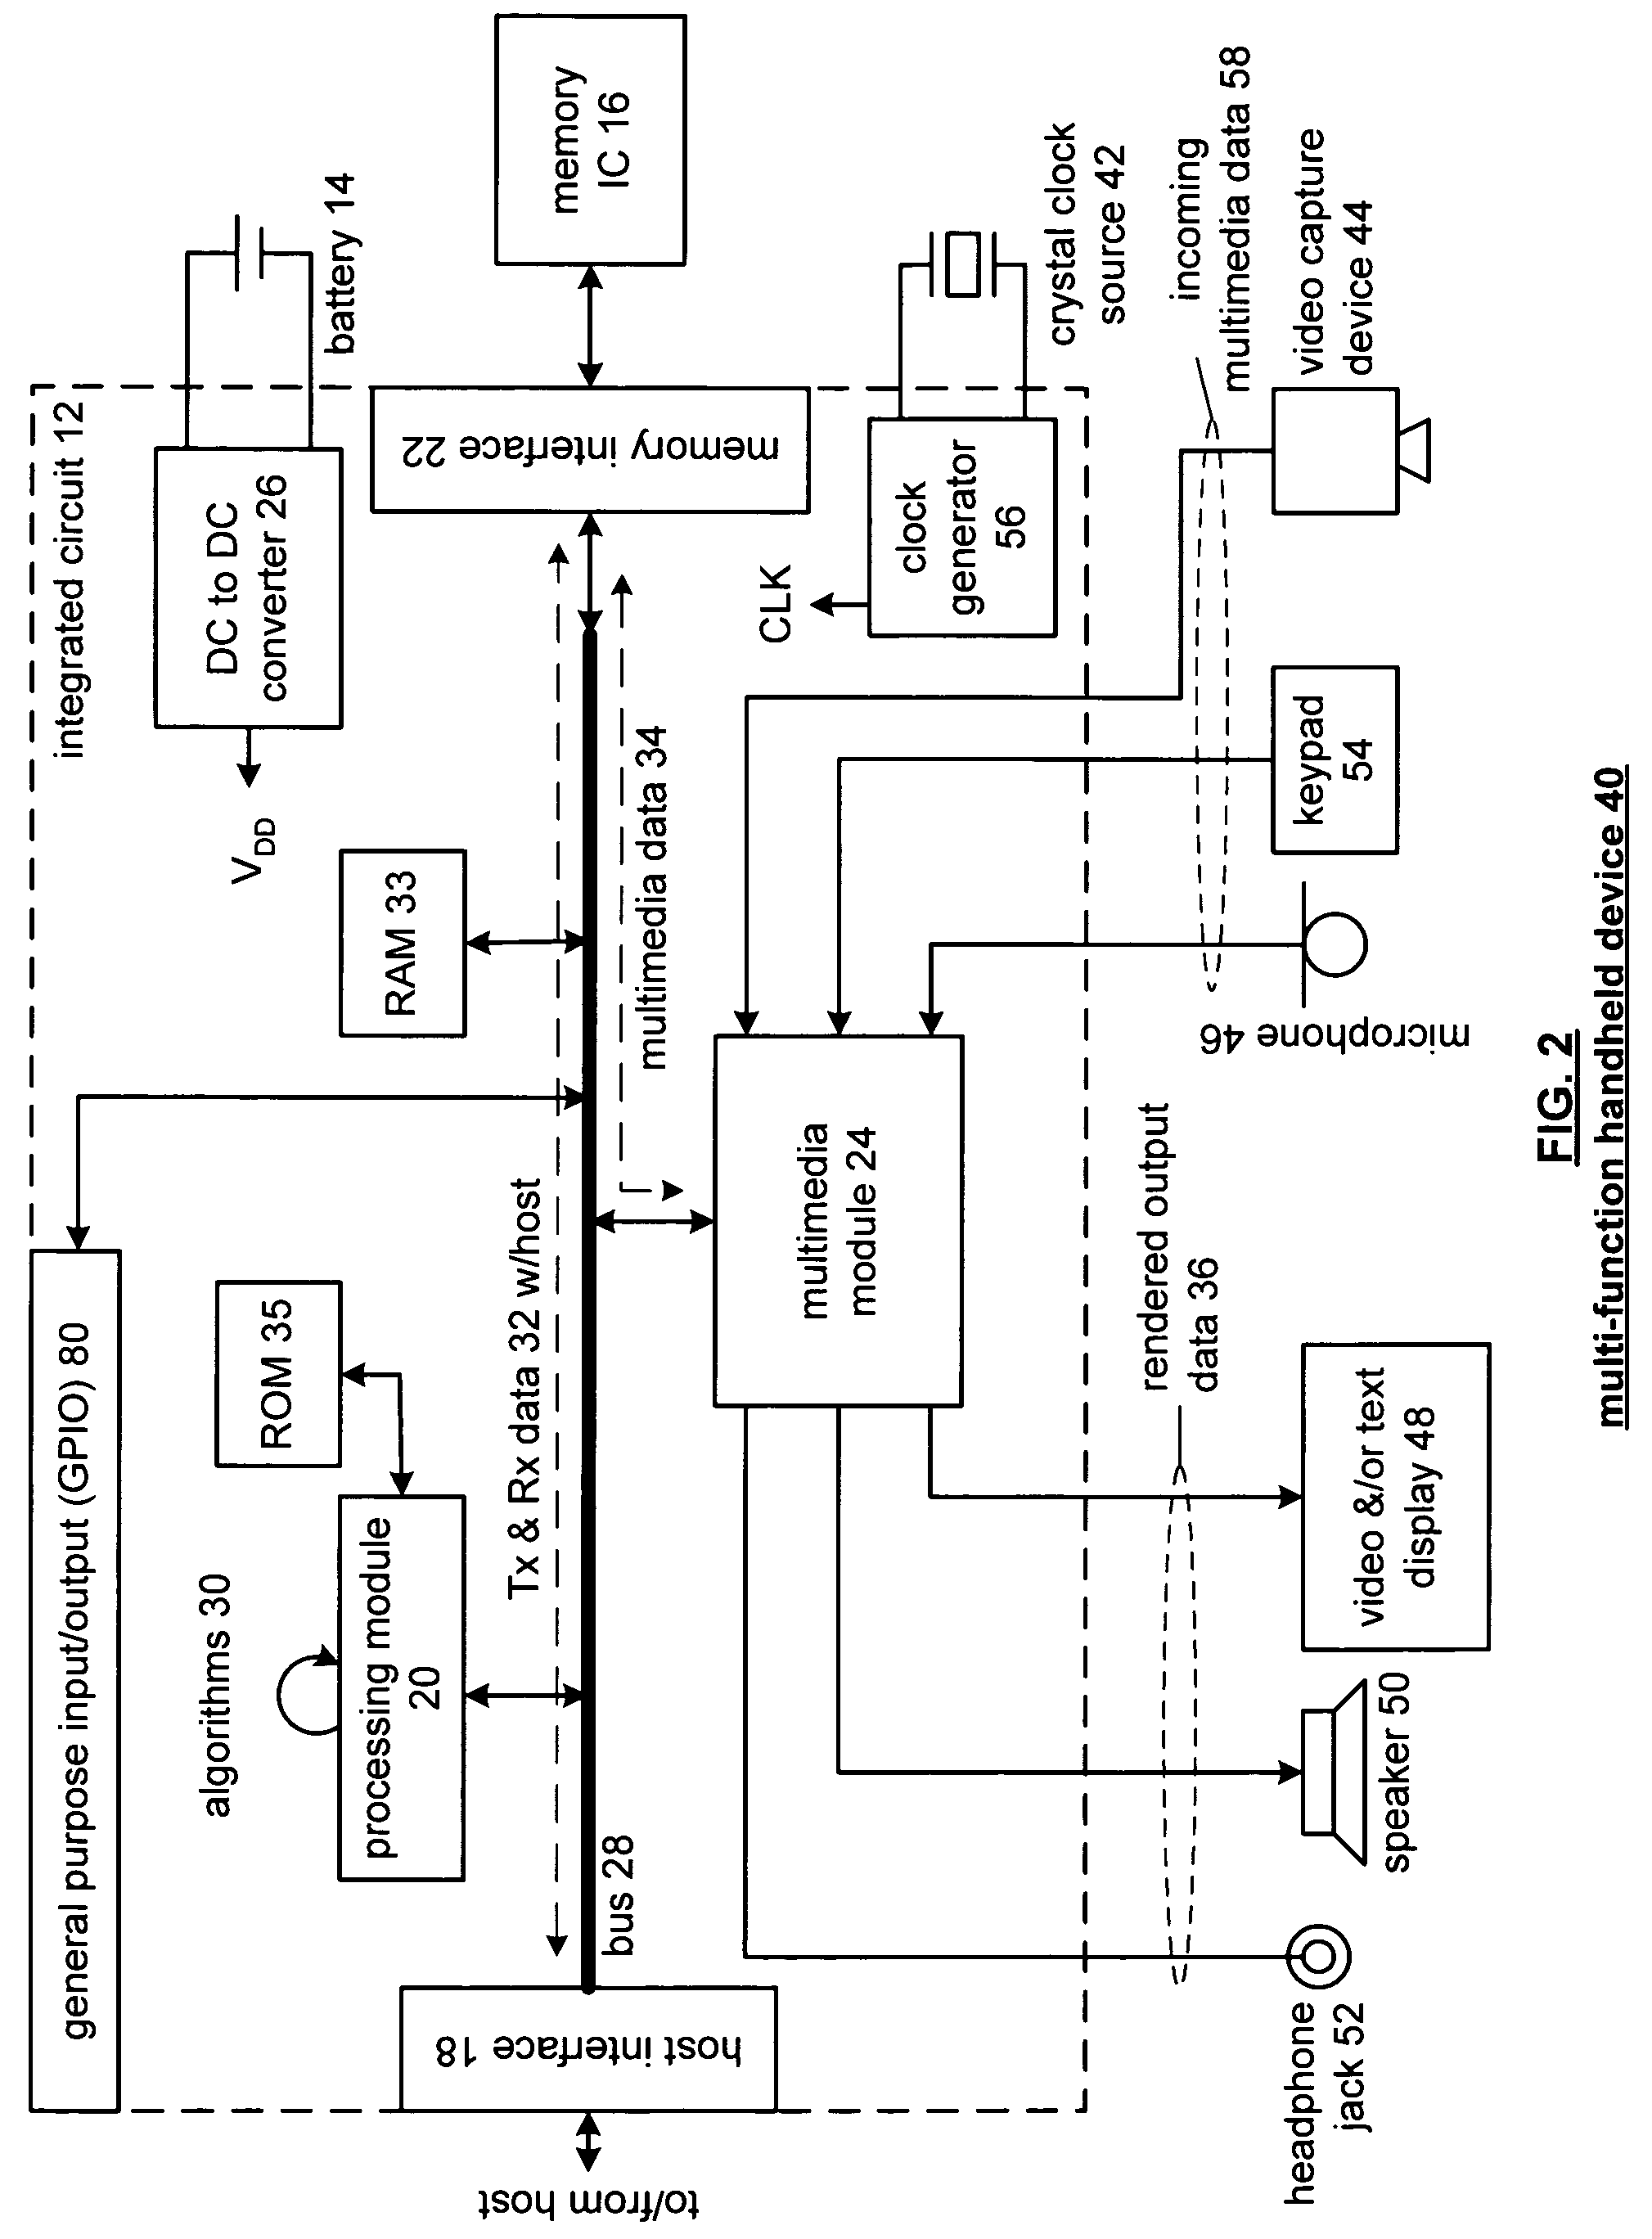 Configurable integrated circuit for use in a multi-function handheld device